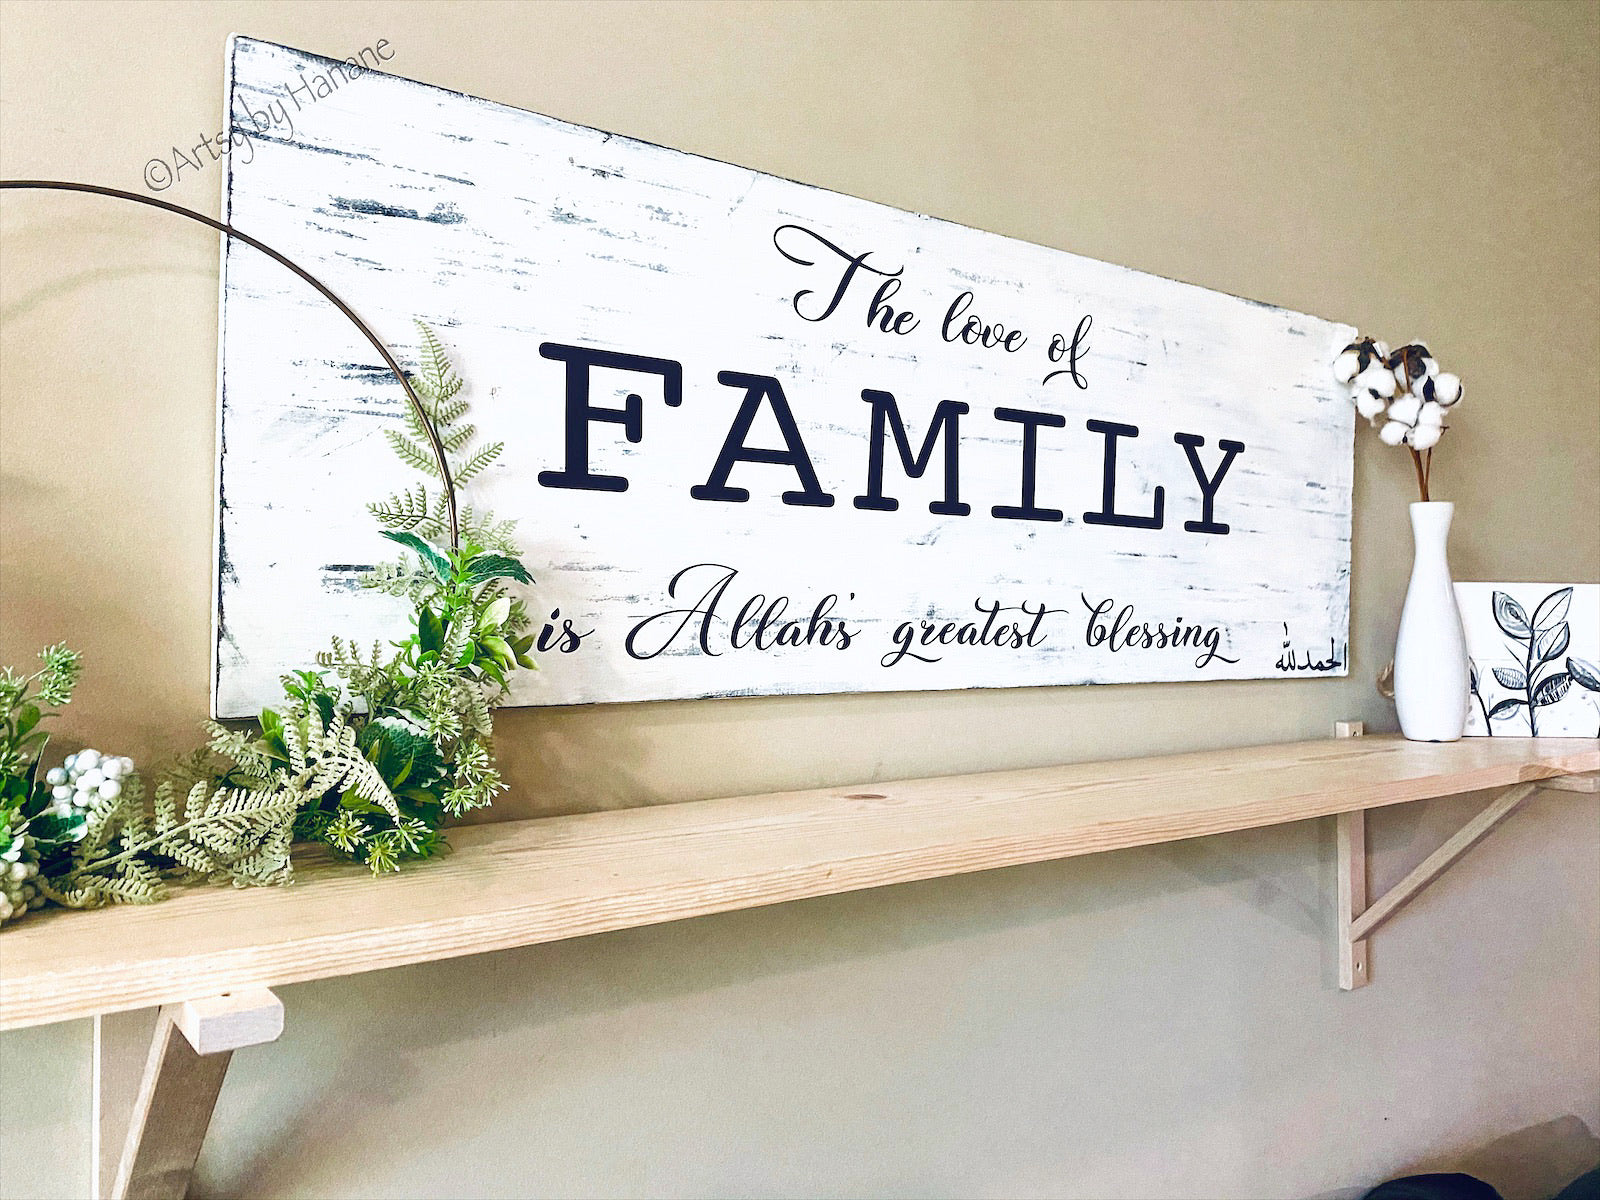 Large Family Sign